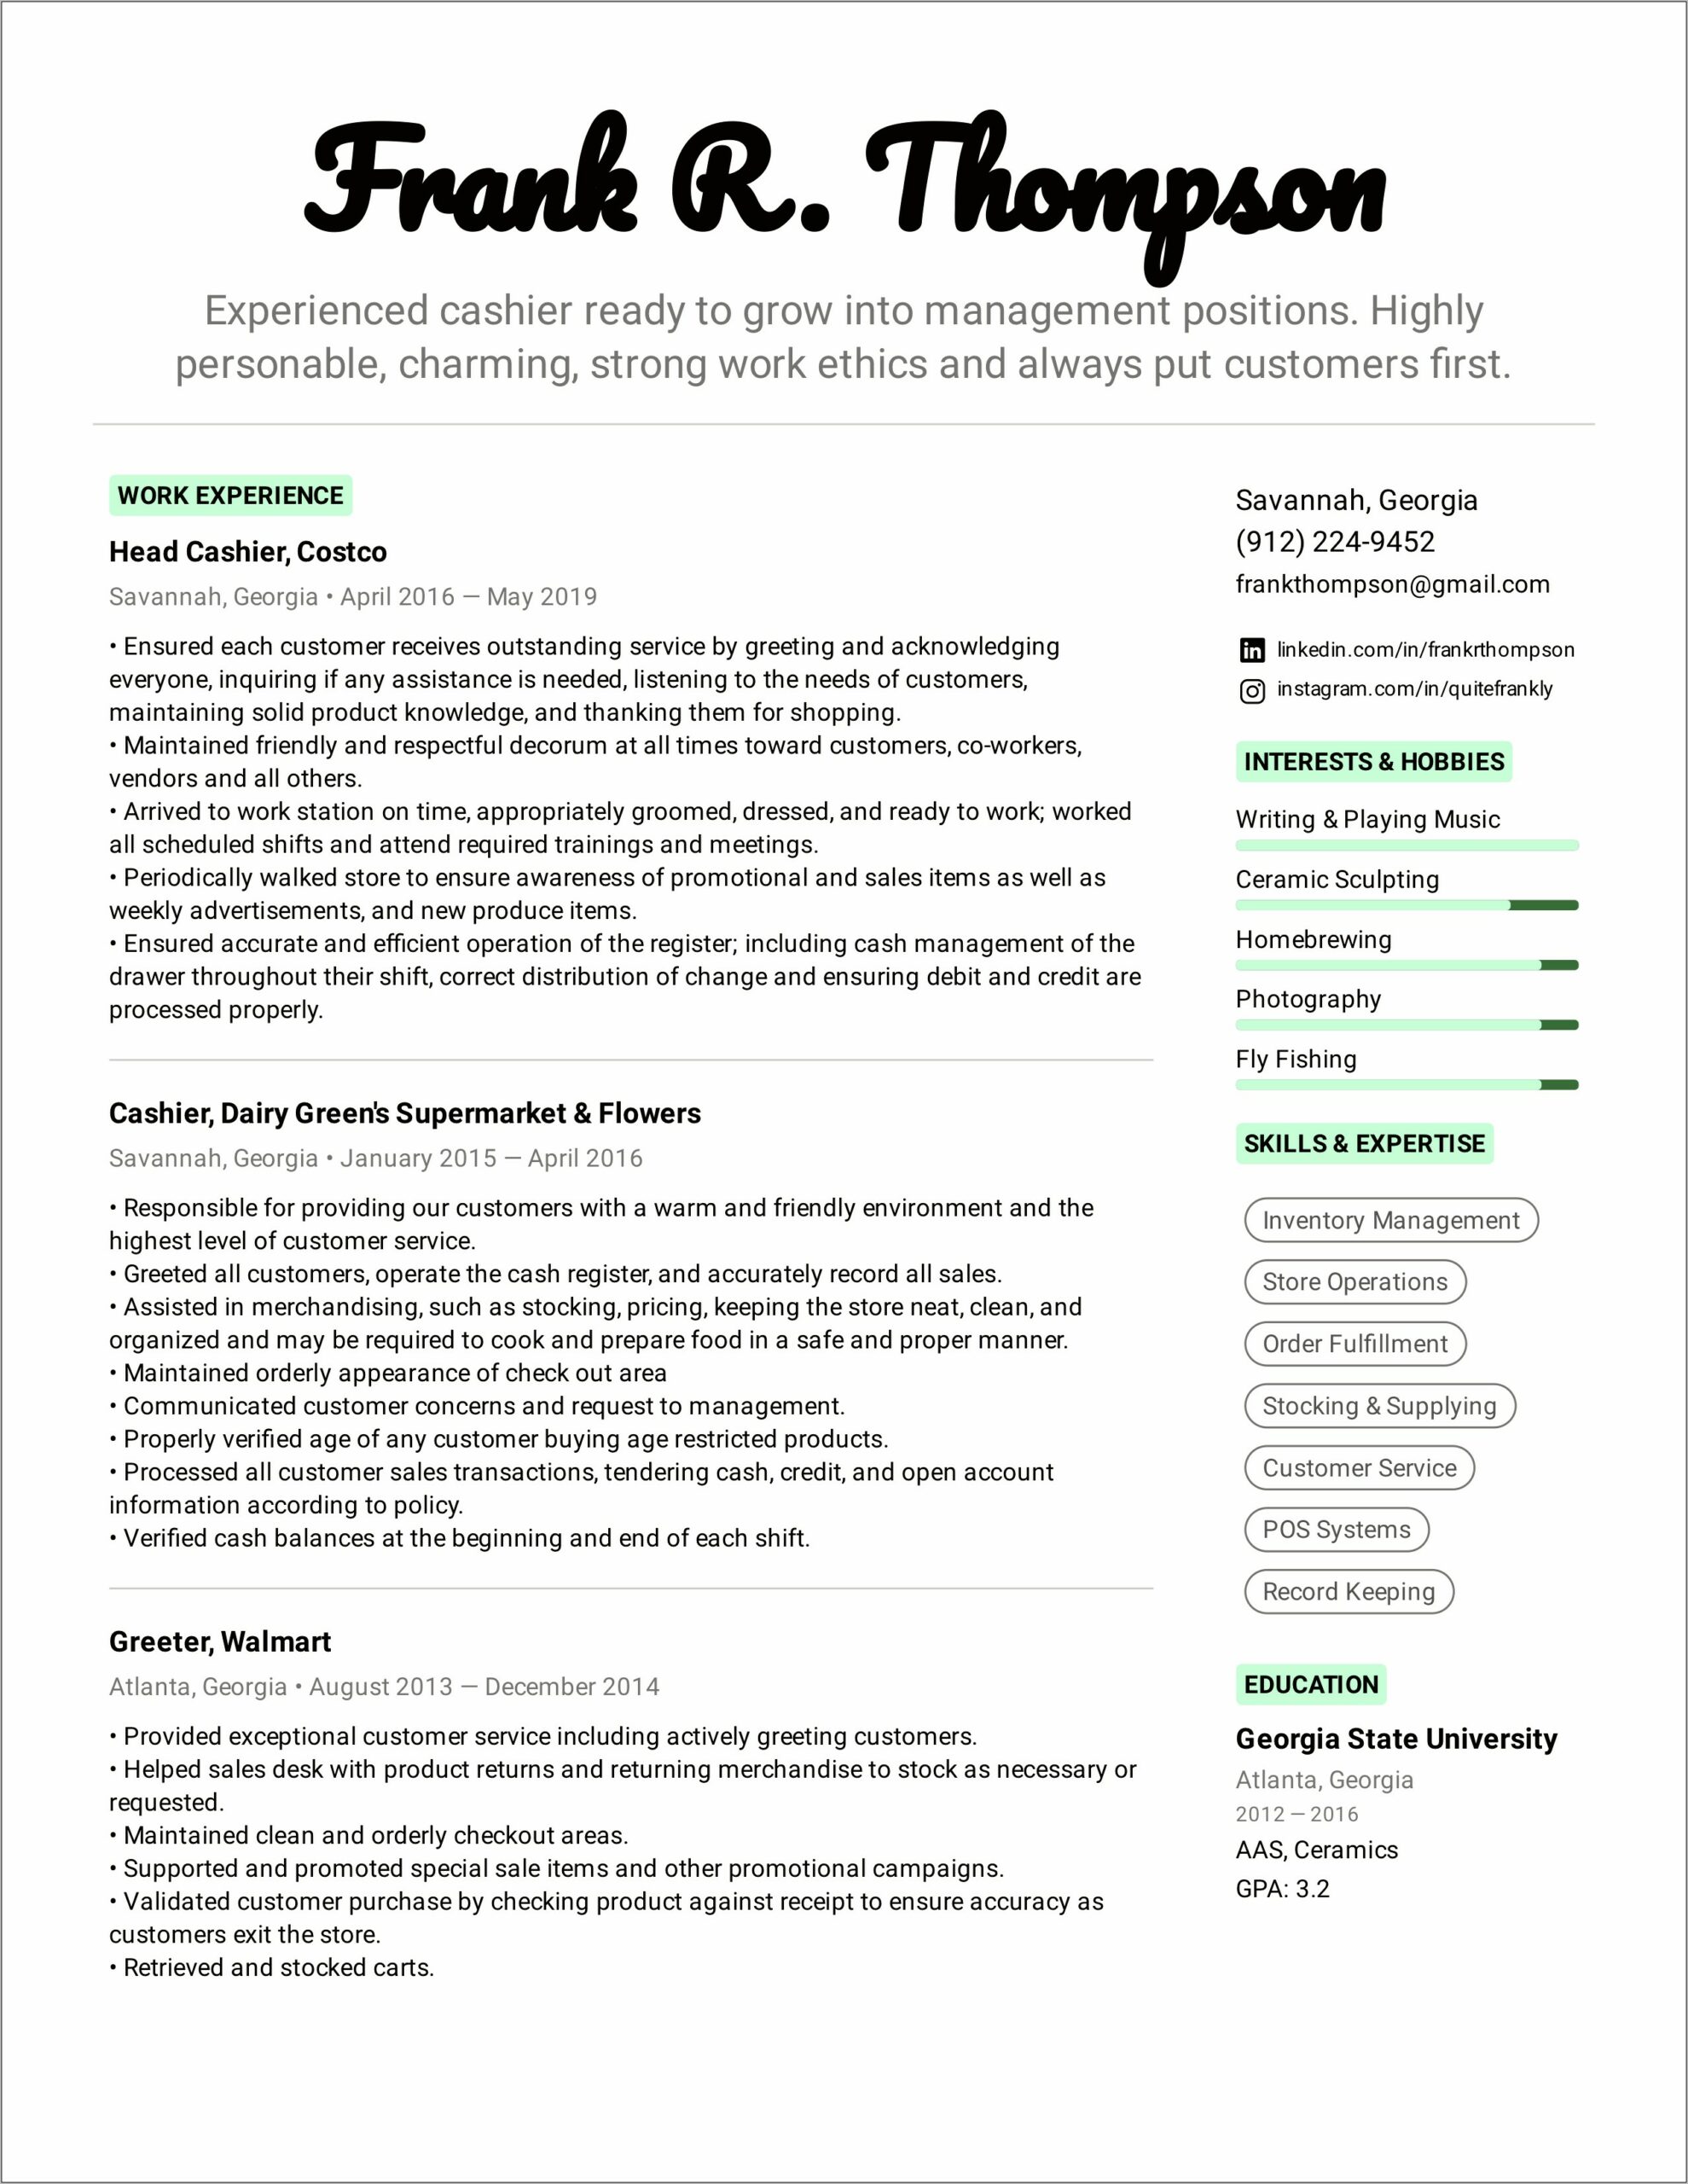 Sample Chronological Resume For A Retail Position